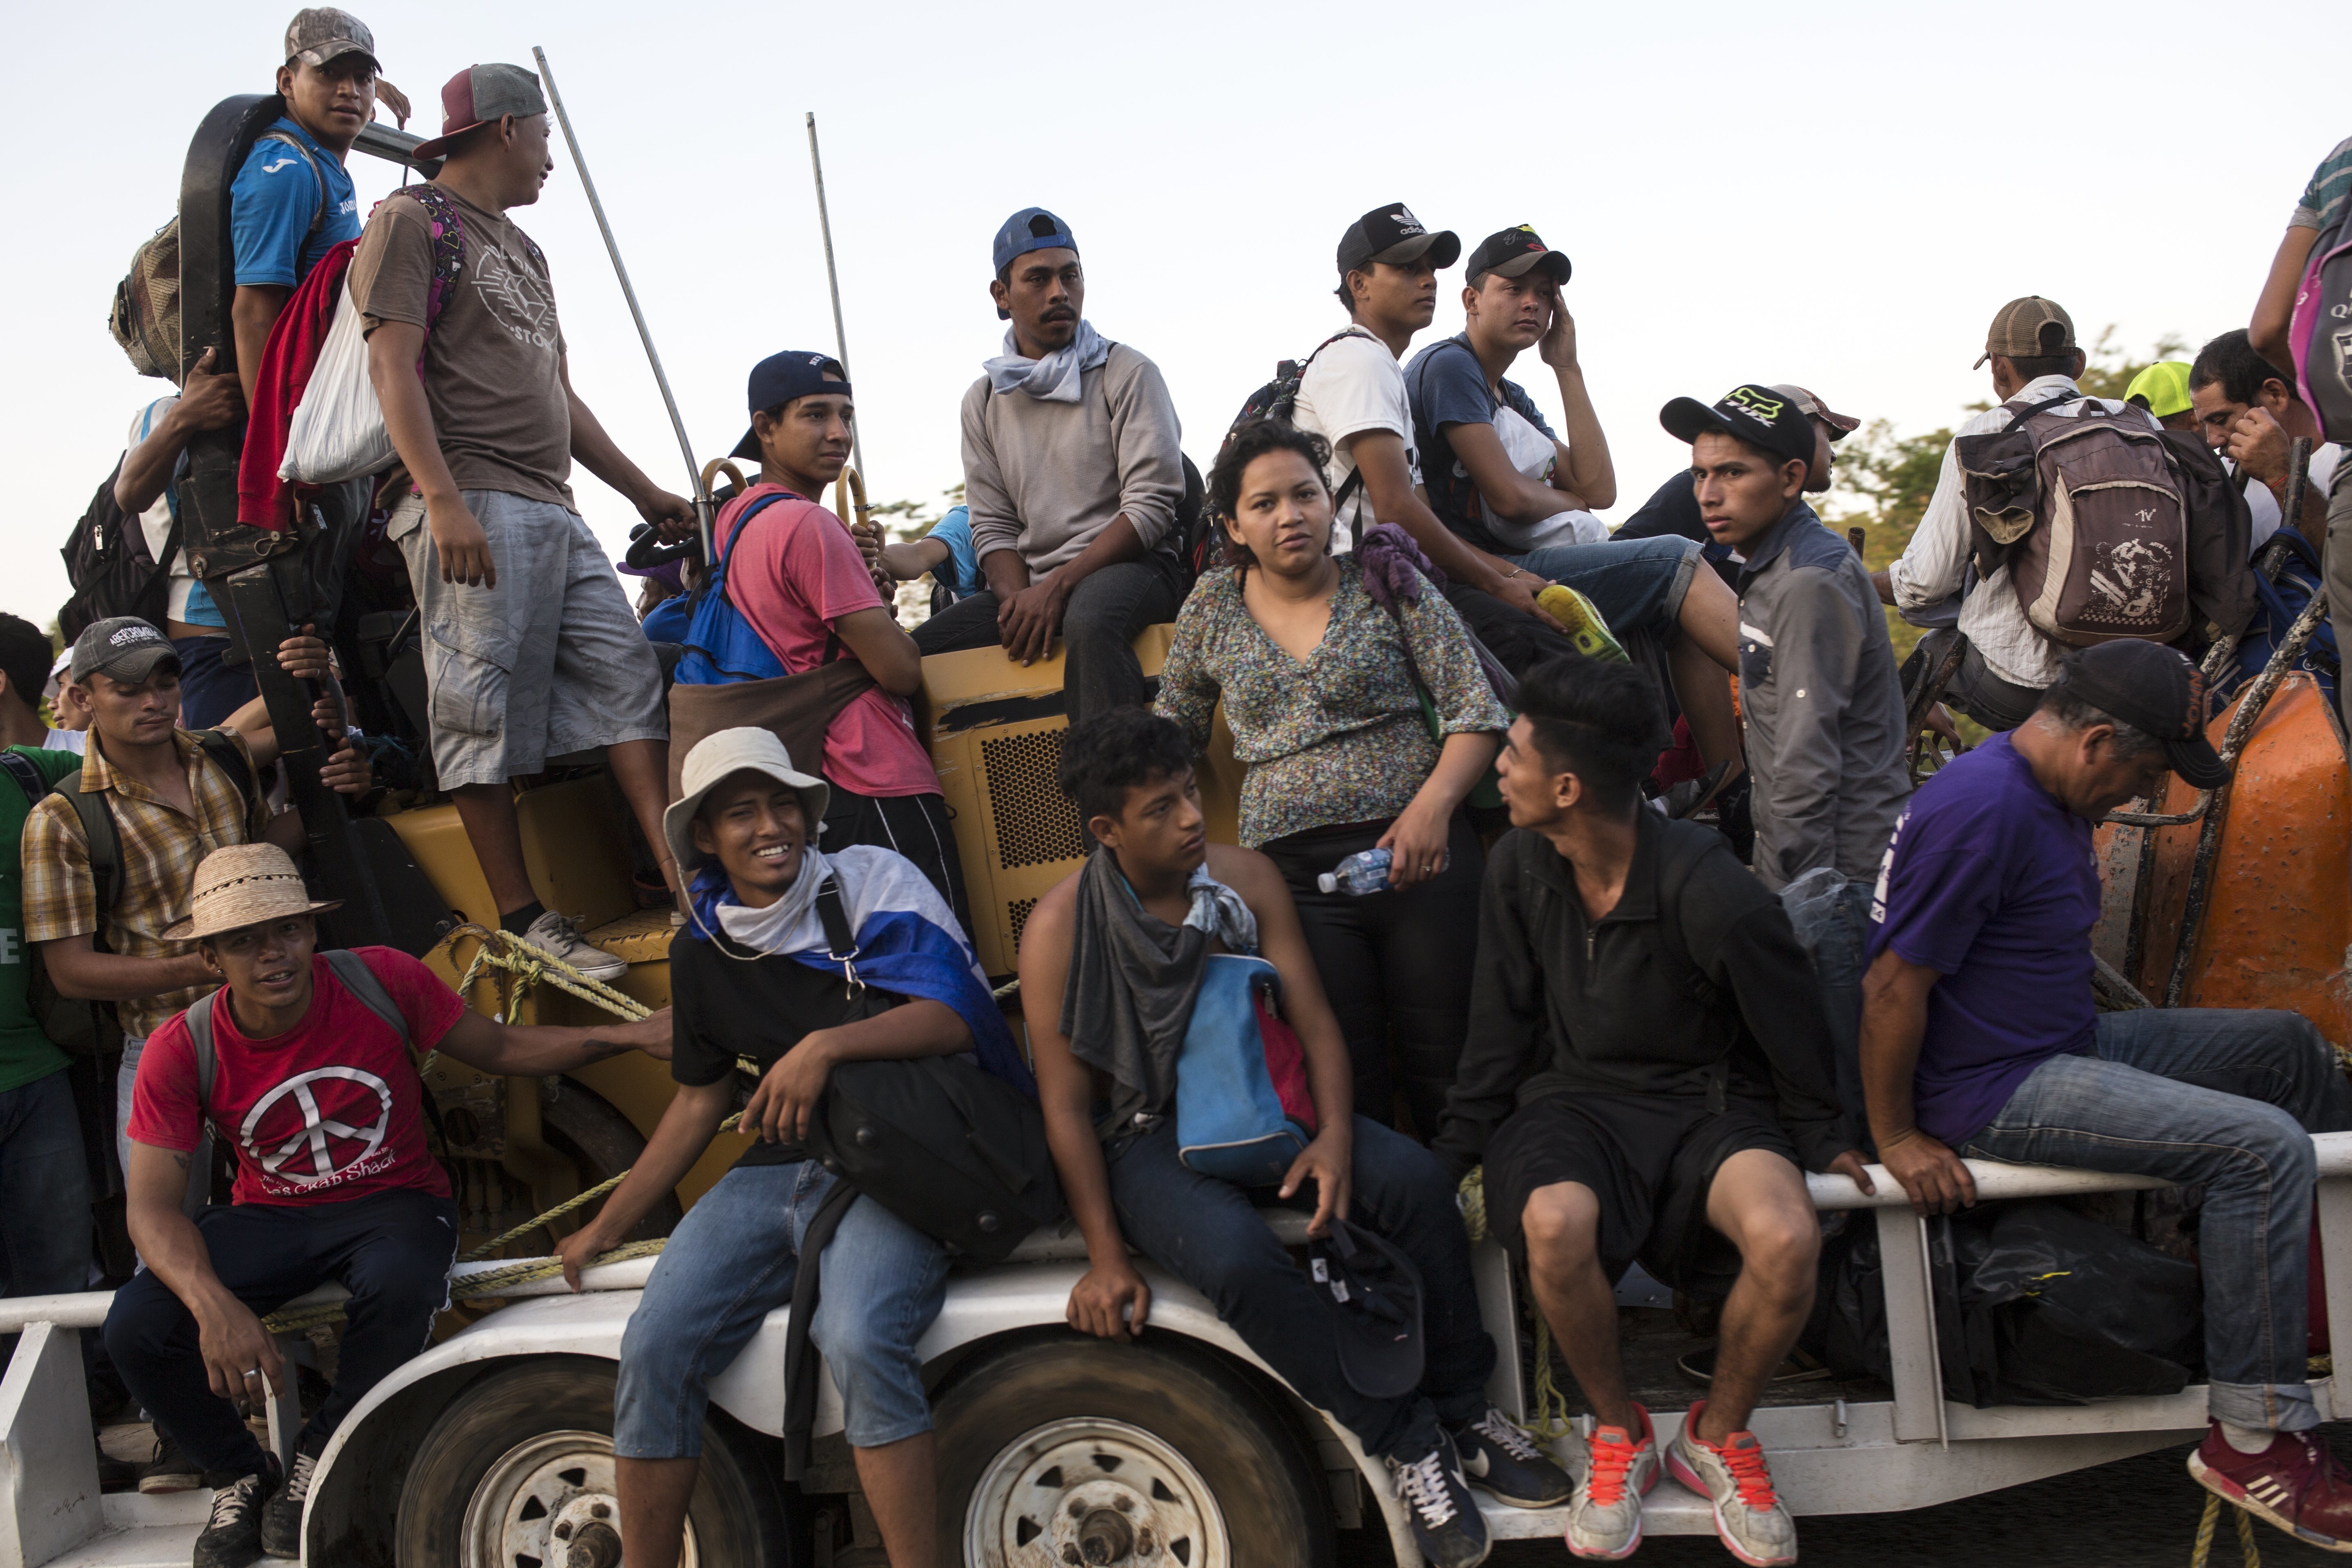 Central American migrants traveling with a caravan to the U.S. crowd onto a tractor as they make their way to Mapastepec, Mexico, Wednesday, Oct. 24, 2018. Thousands of Central American migrants renewed their hoped-for march to the United States on Wednesday, setting out before dawn with plans to travel another 45 miles (75 kilometers) of the more than 1,000 miles that still lie before them. (AP Photo/Rodrigo Abd)